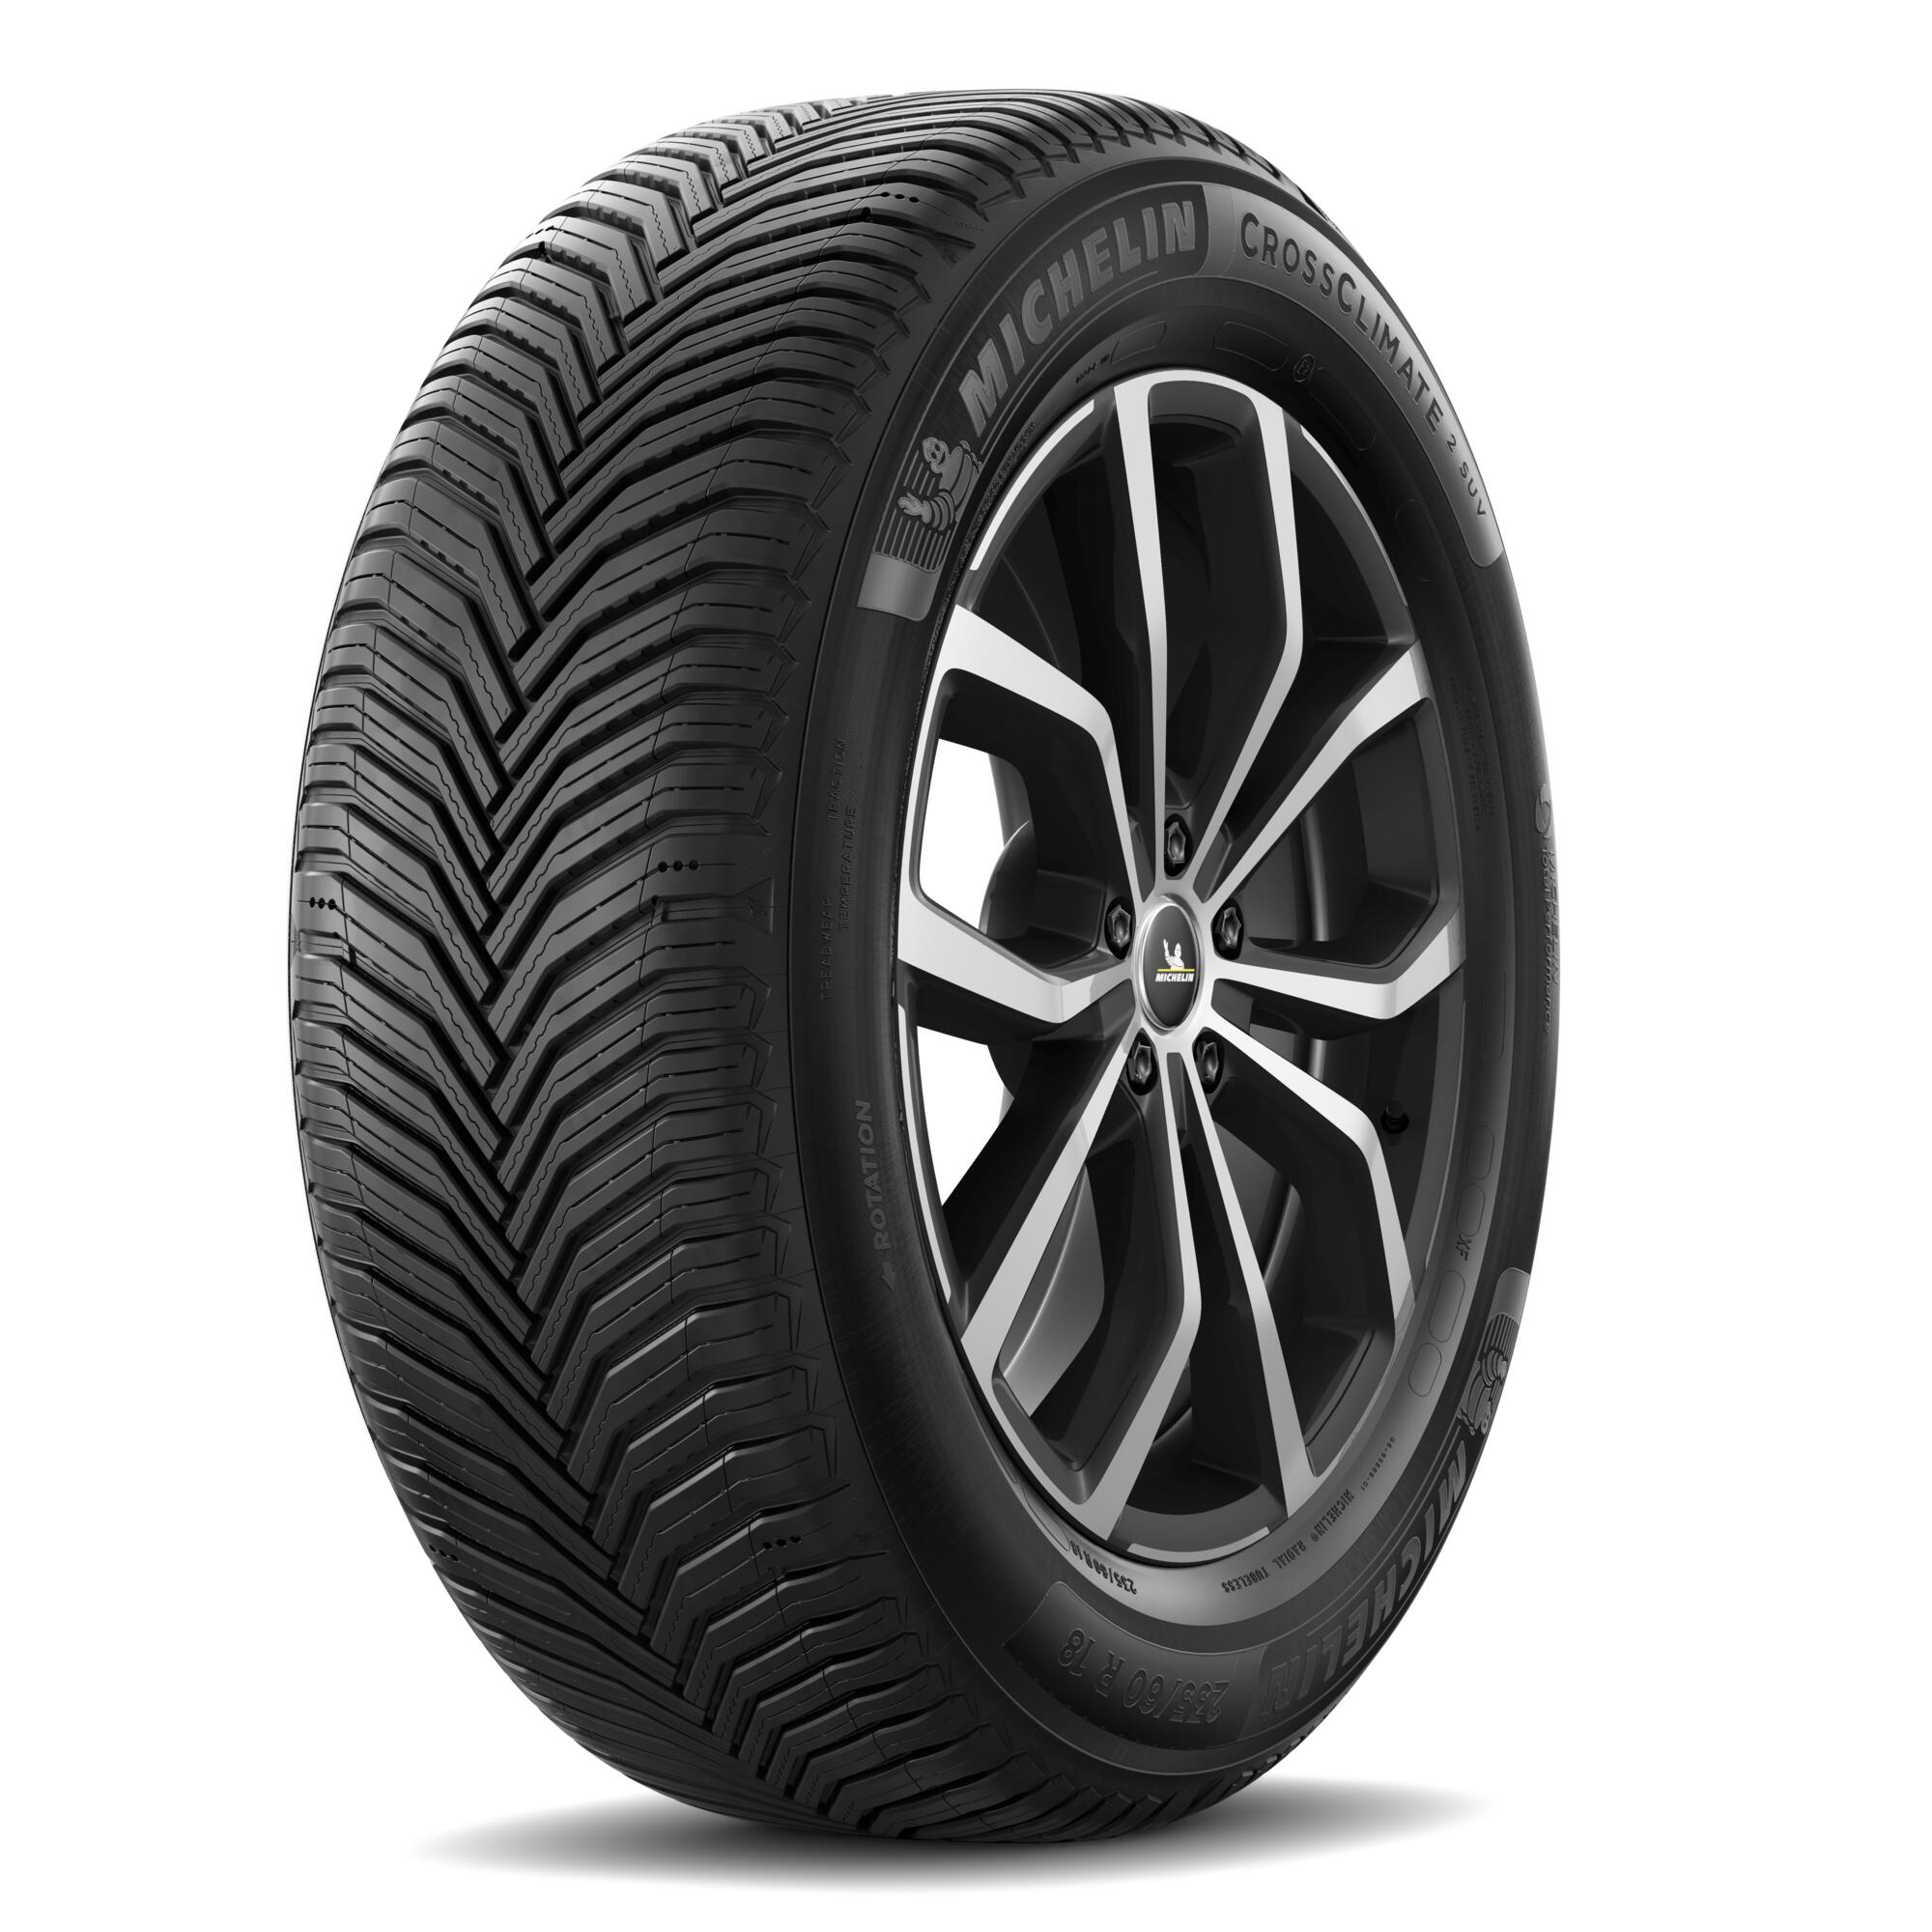 CrossClimate Tyre Tests - Michelin Reviews and SUV 2